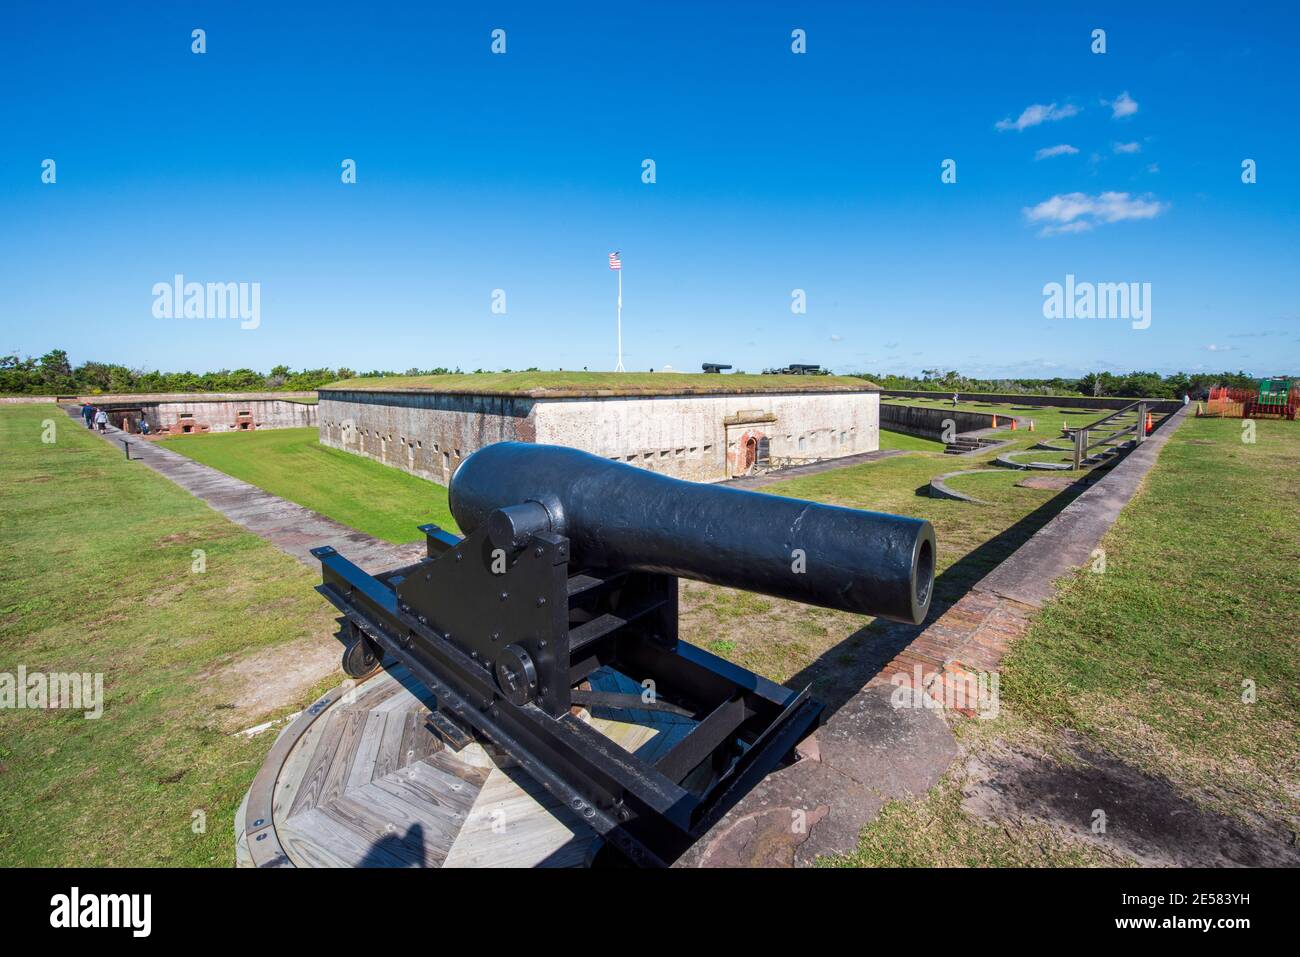 View of Model 1861 Confederate Rodman 10-inch Columbiad cannon at Fort Macon State Park in Atlantic Beach, NC. Fort Macon was constructed after the Wa Stock Photo